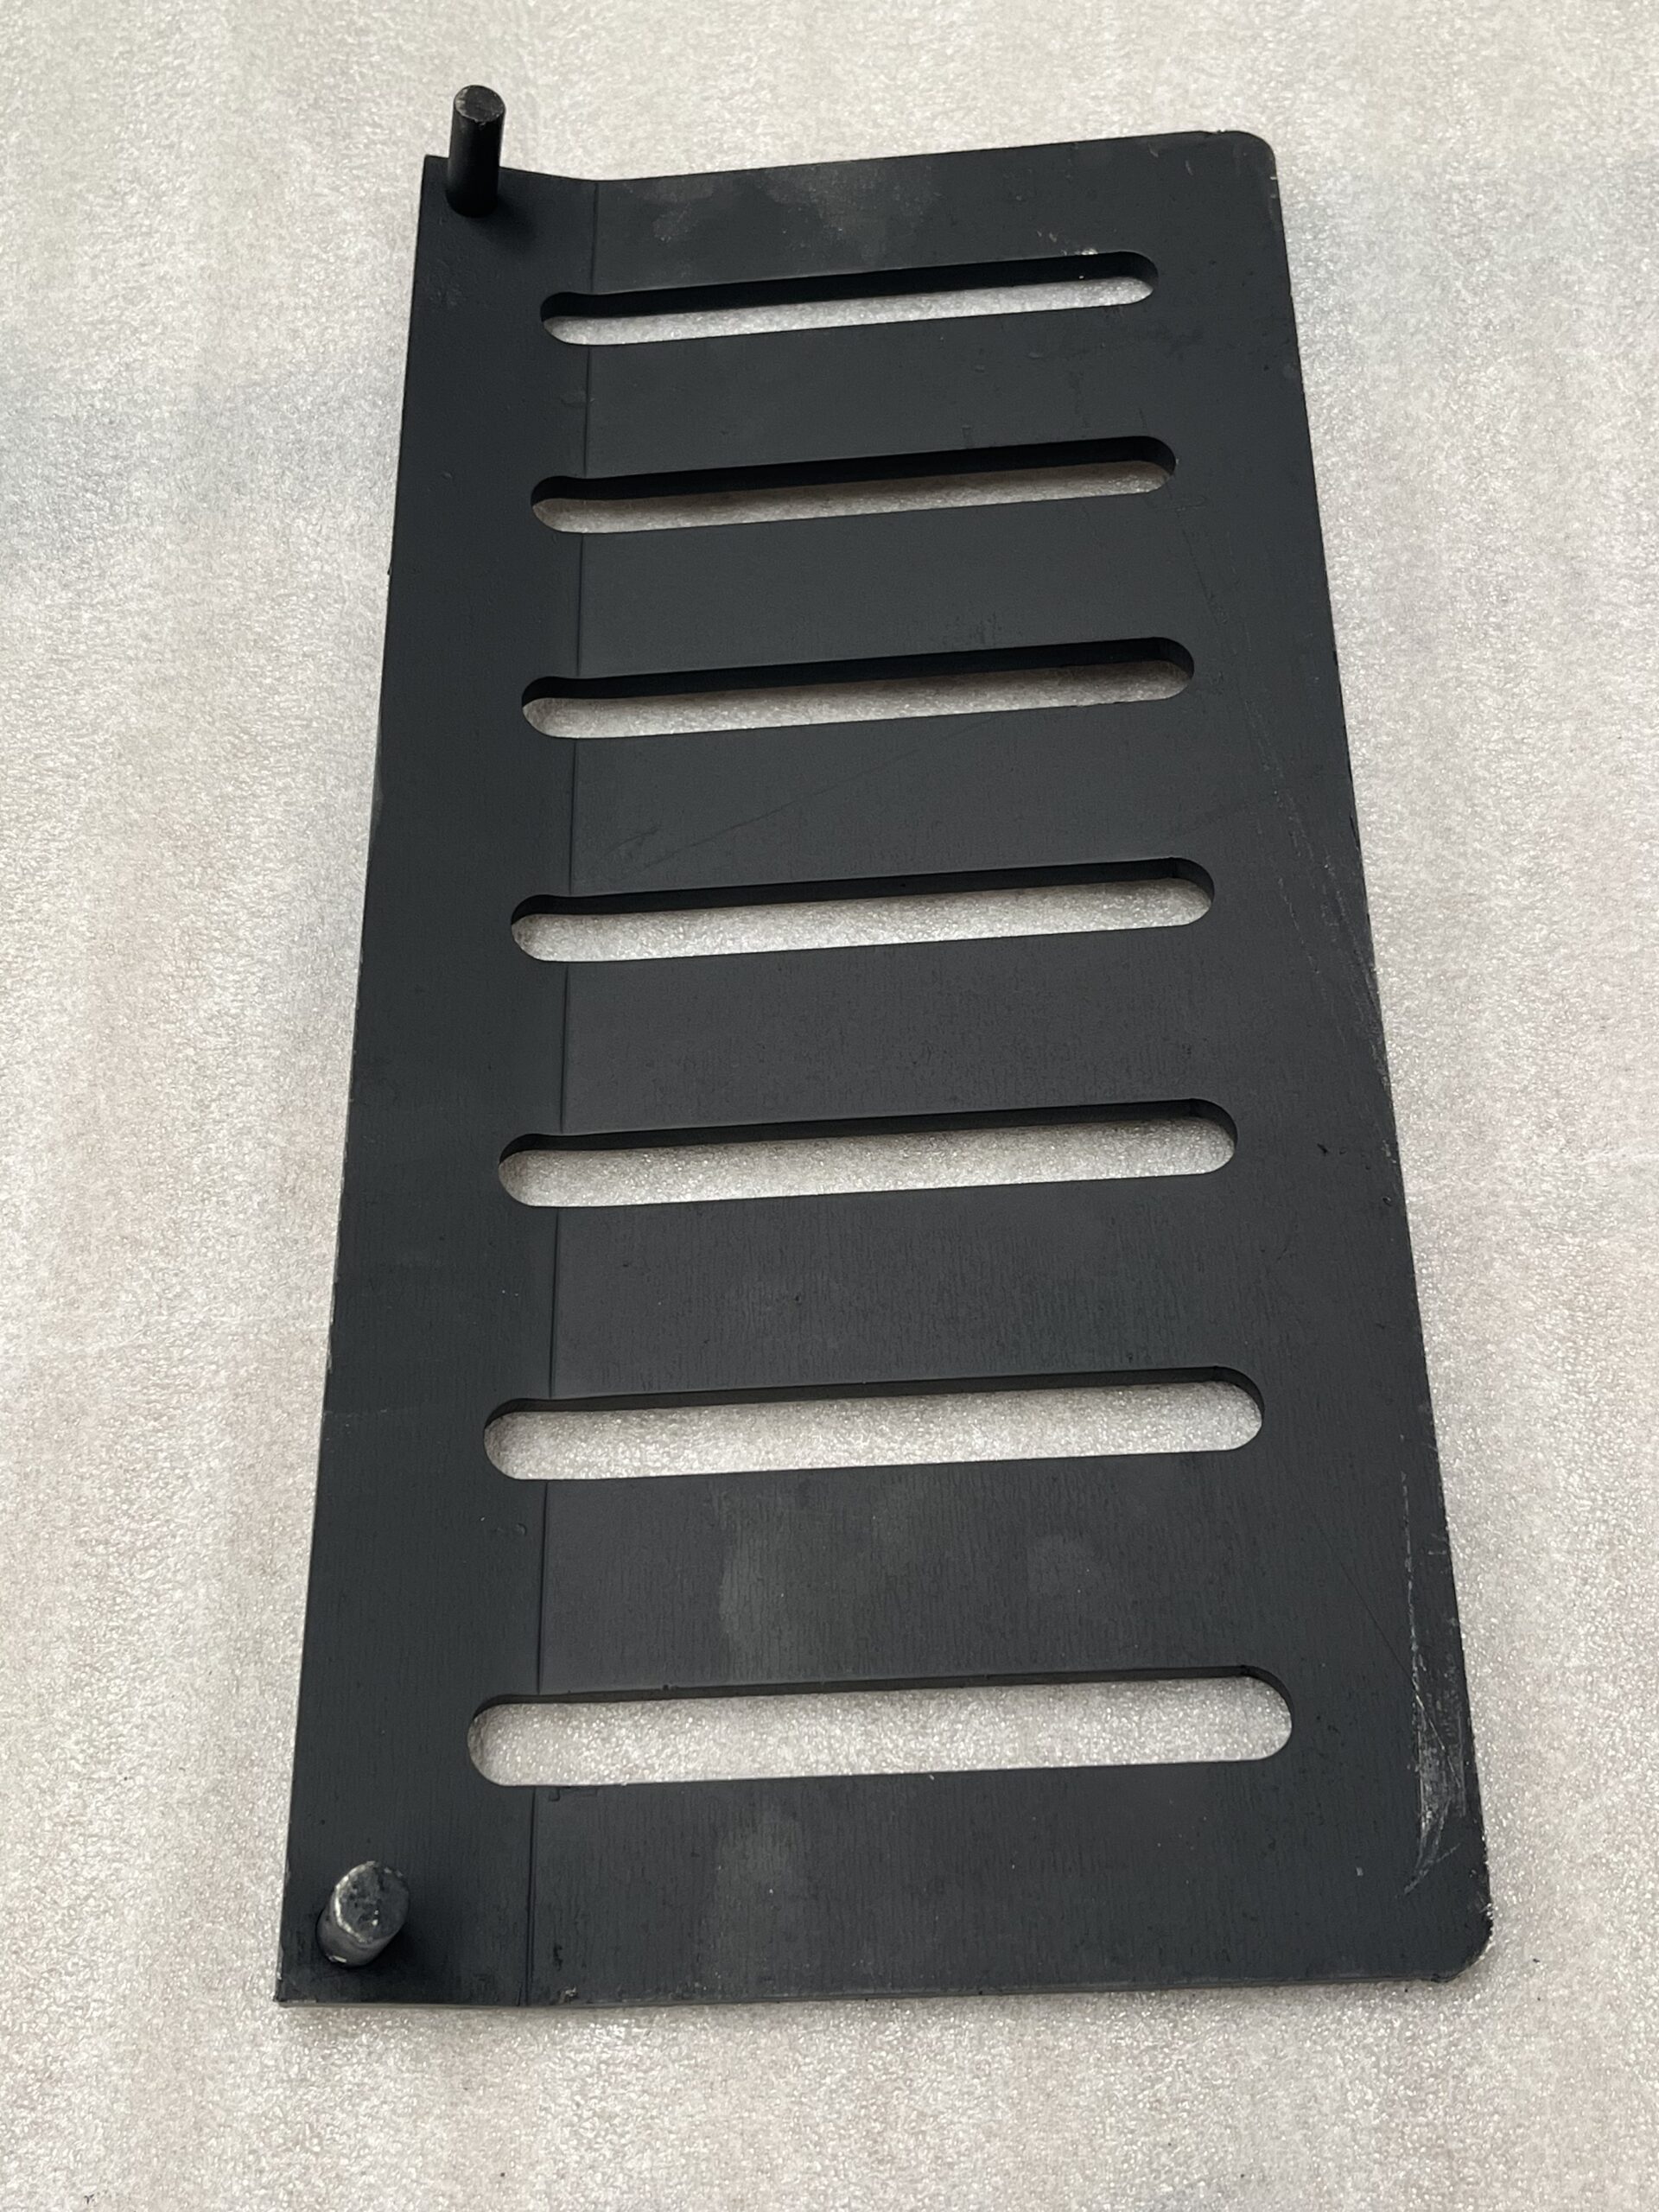 Stoker fire front transition grate